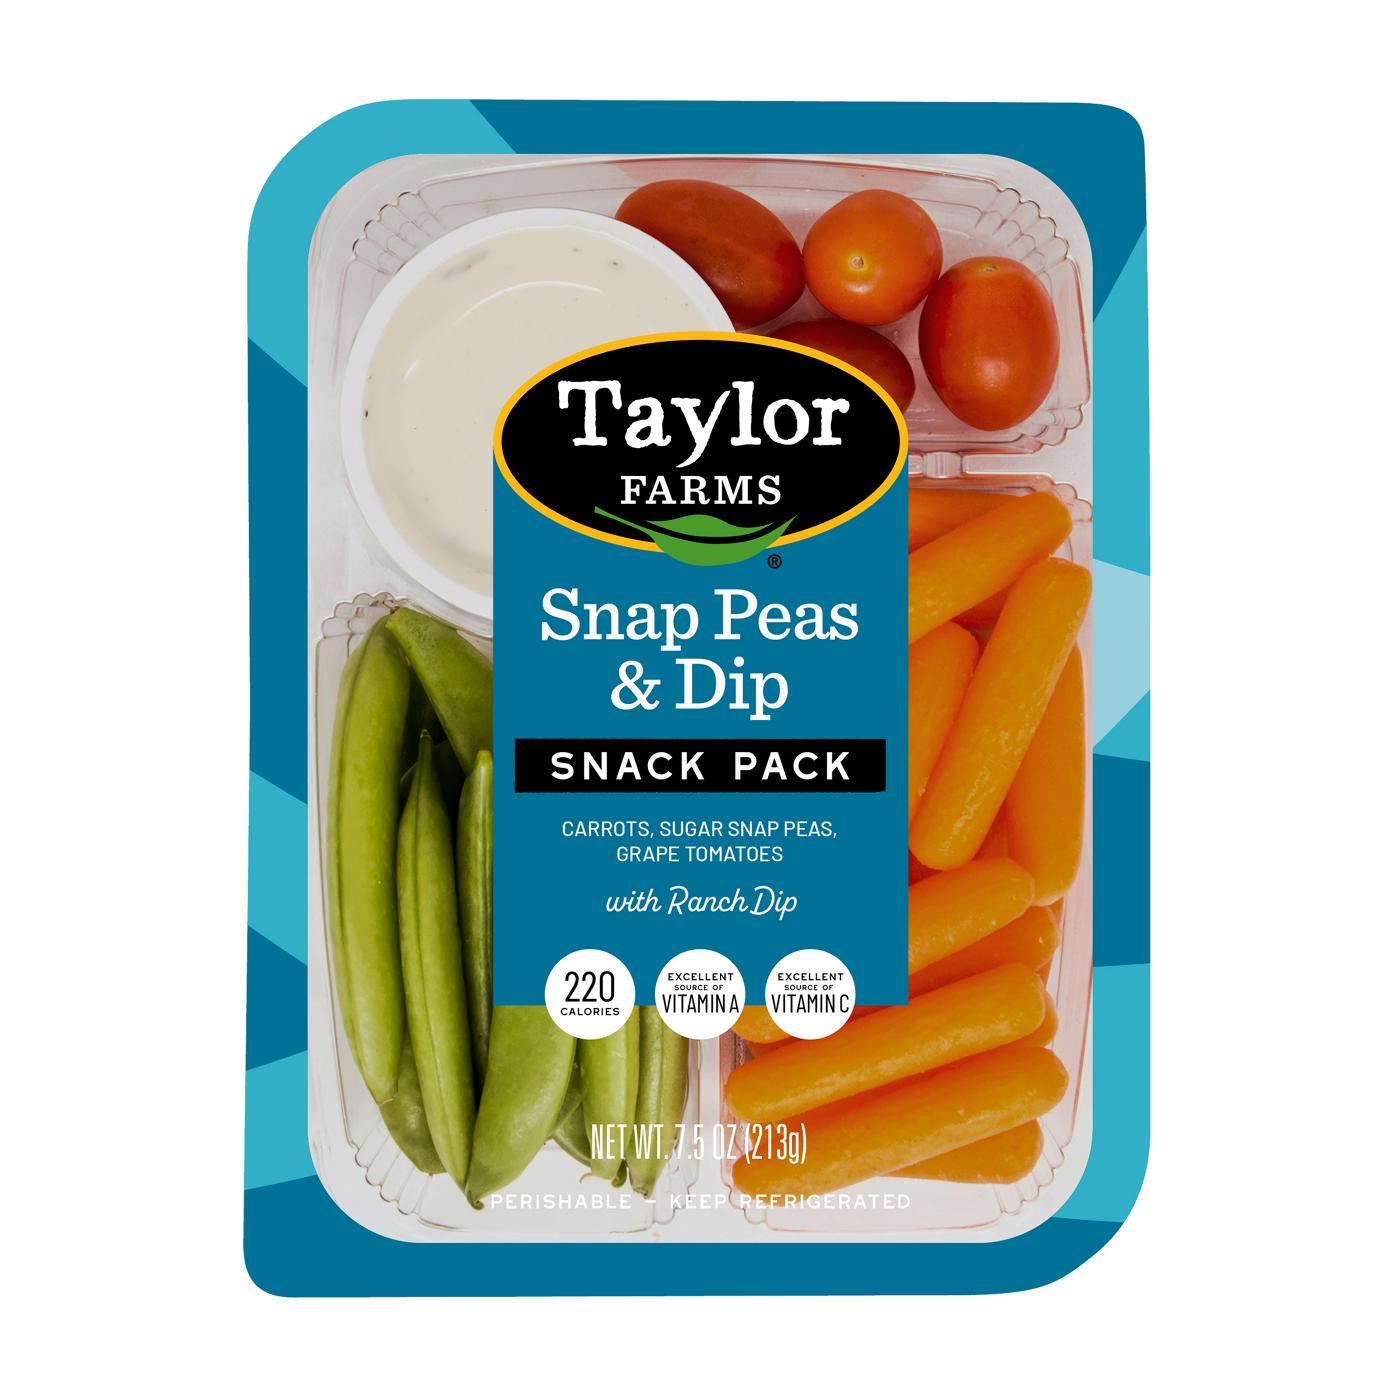 Taylor Farms Snap Peas & Dip Snack Pack; image 1 of 4